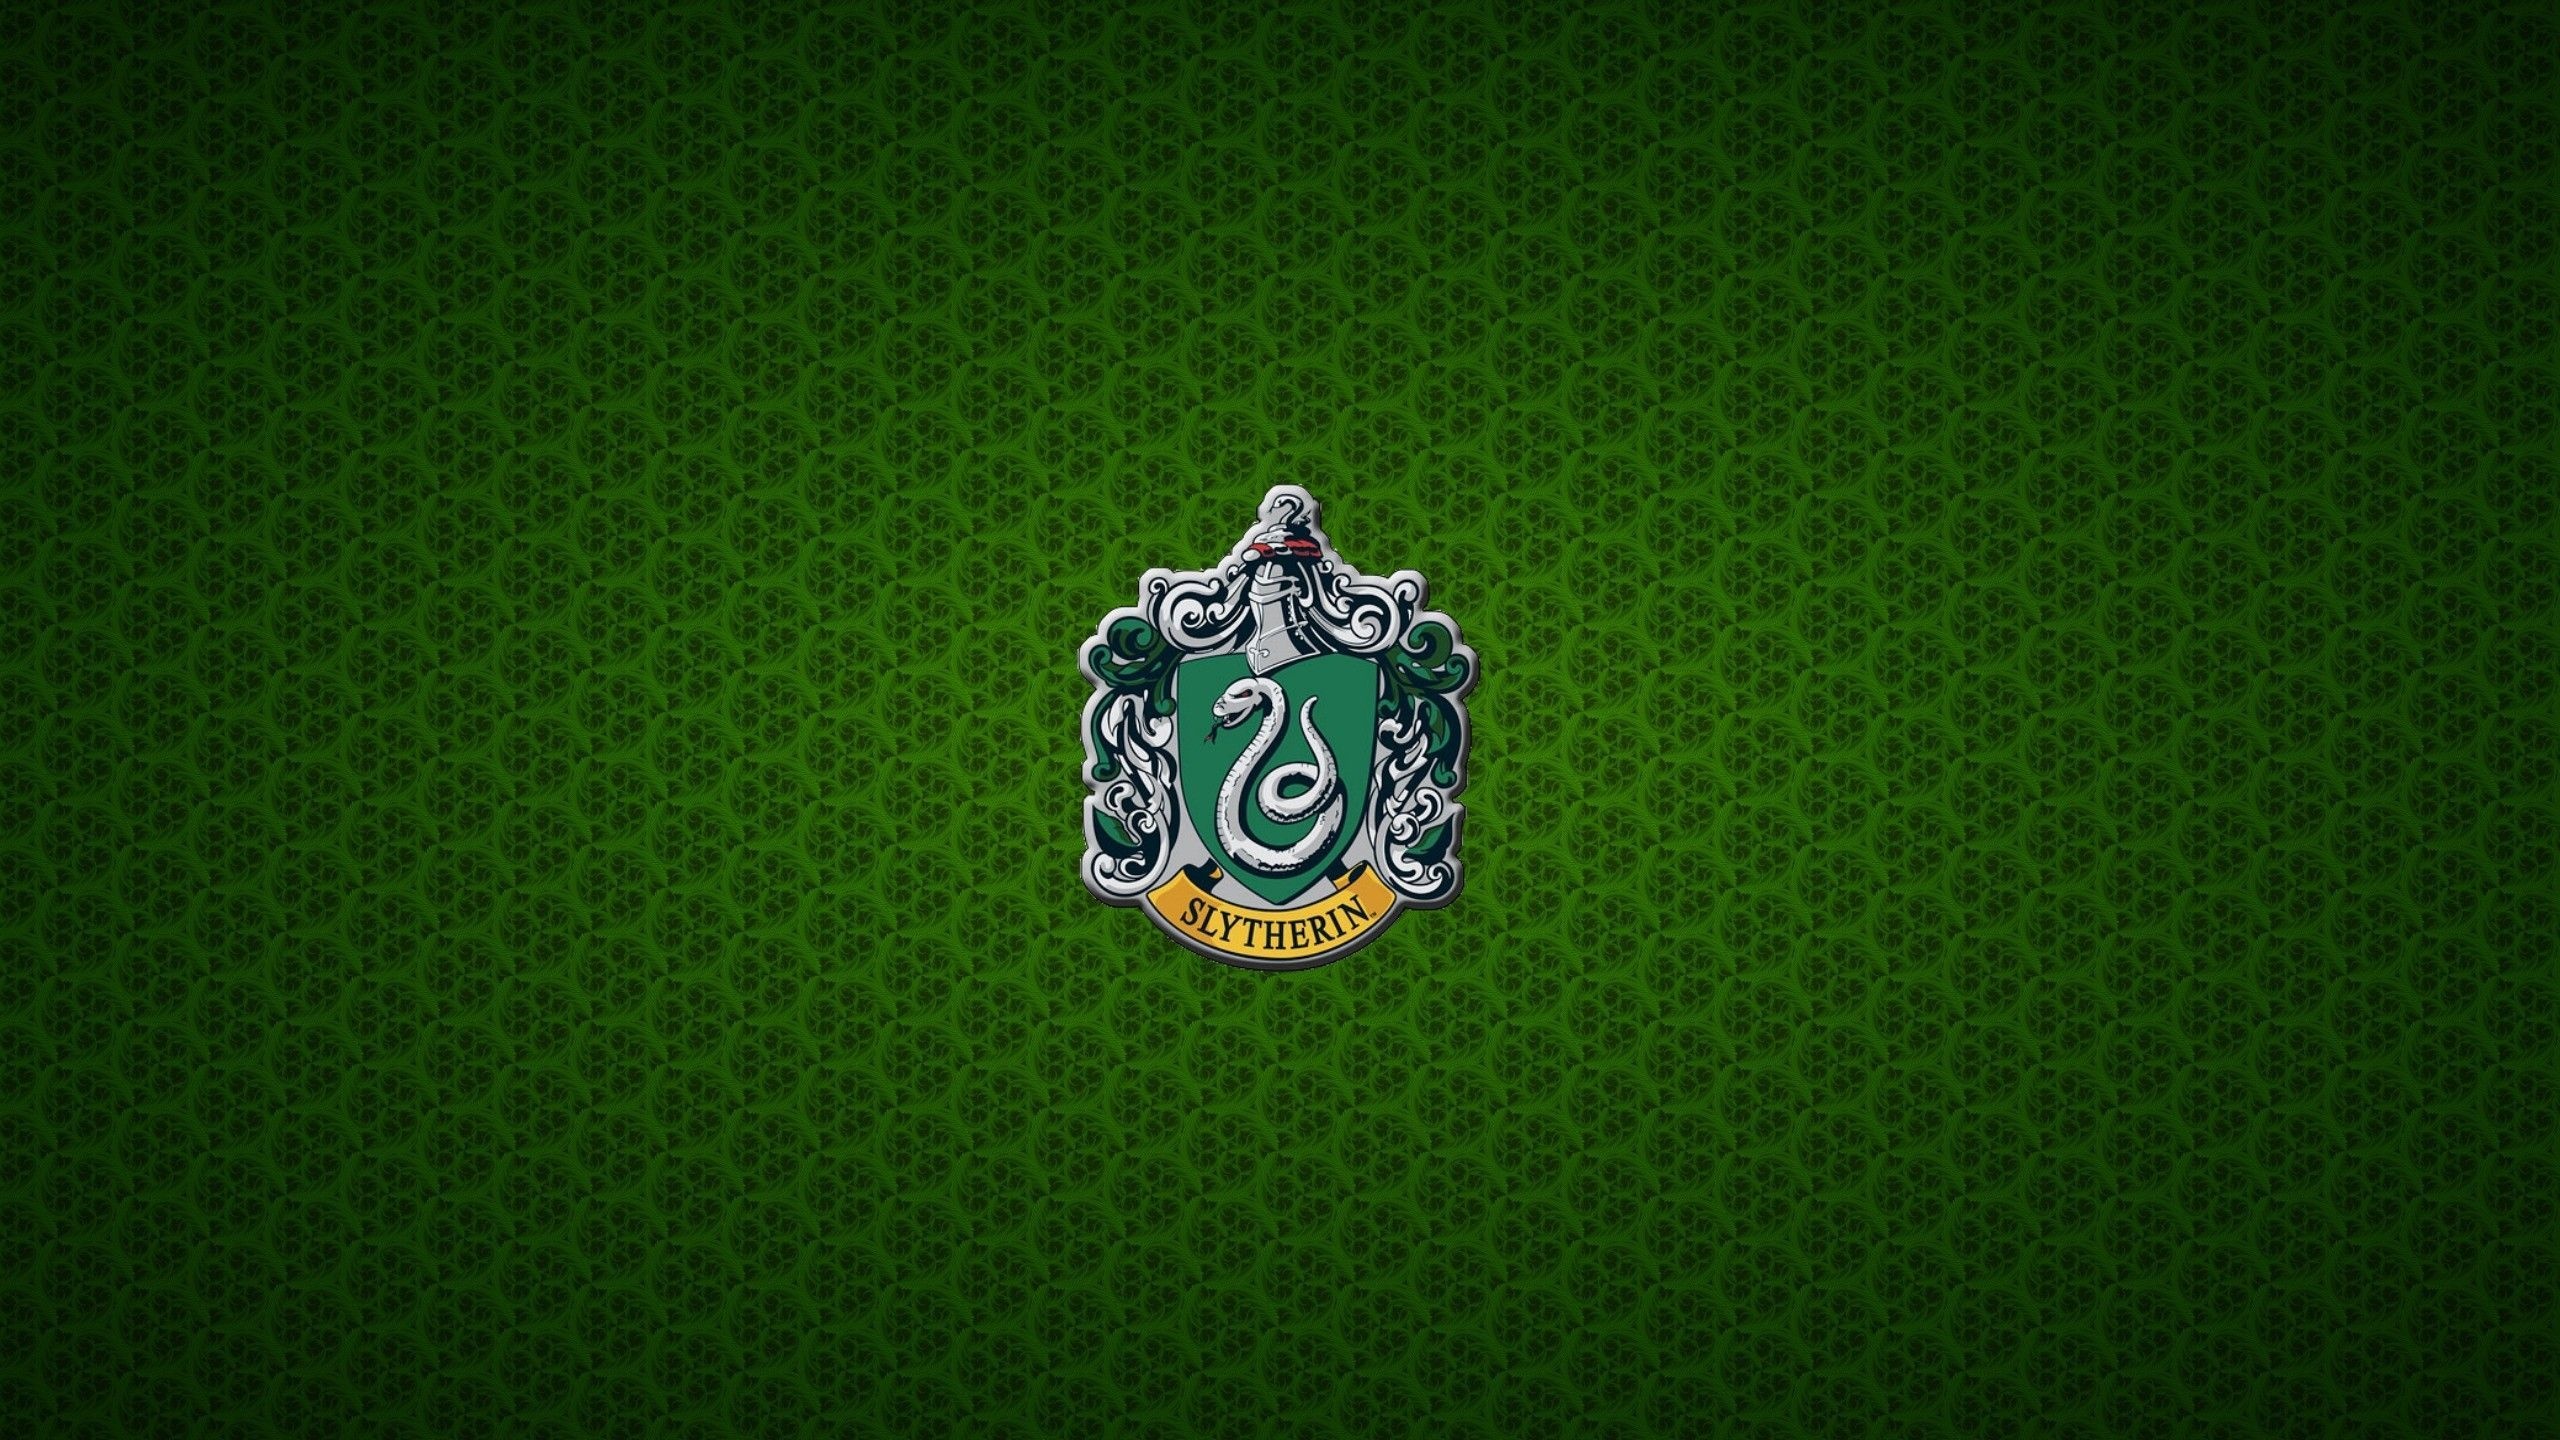 Slytherin 4K wallpapers, High-resolution images, Stunning visuals, Immersive experience, 2560x1440 HD Desktop